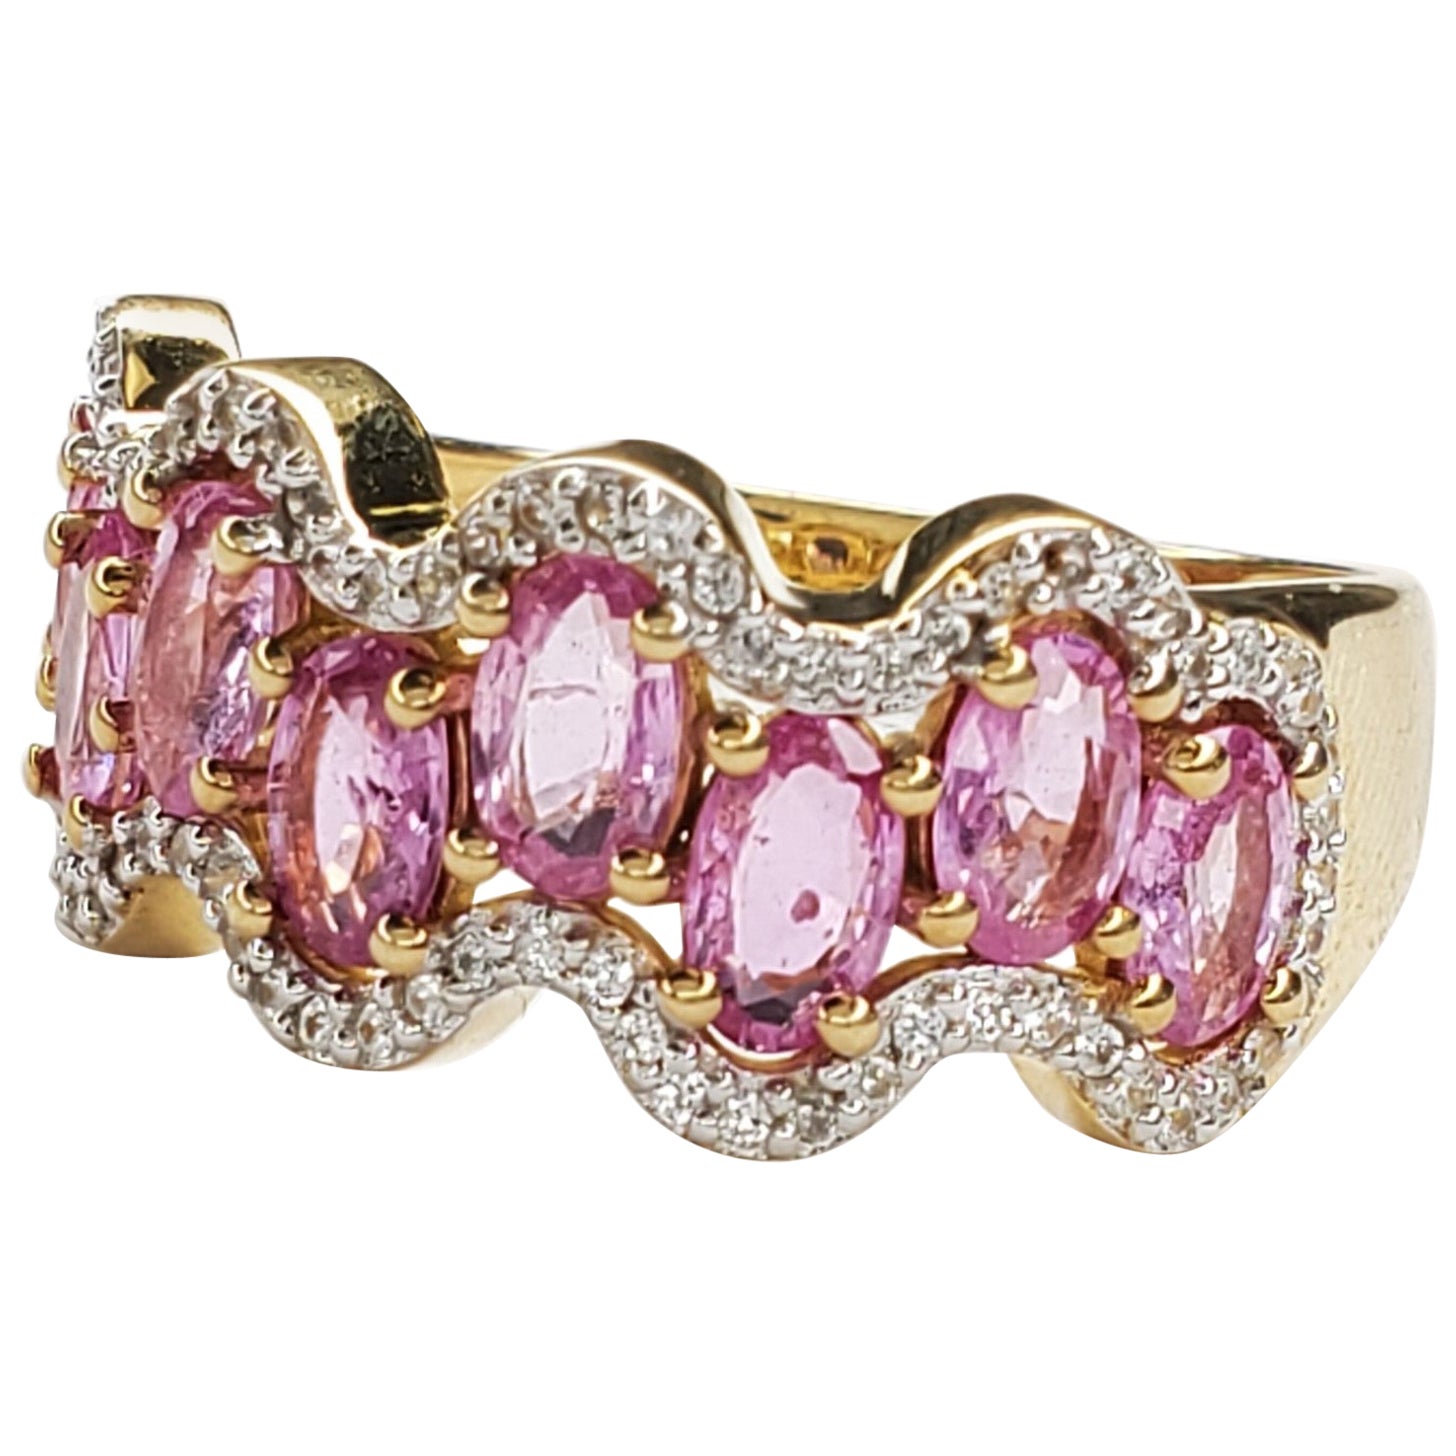 2.14cttw Pink Sapphire and White Zircon Sterling Silver Ring